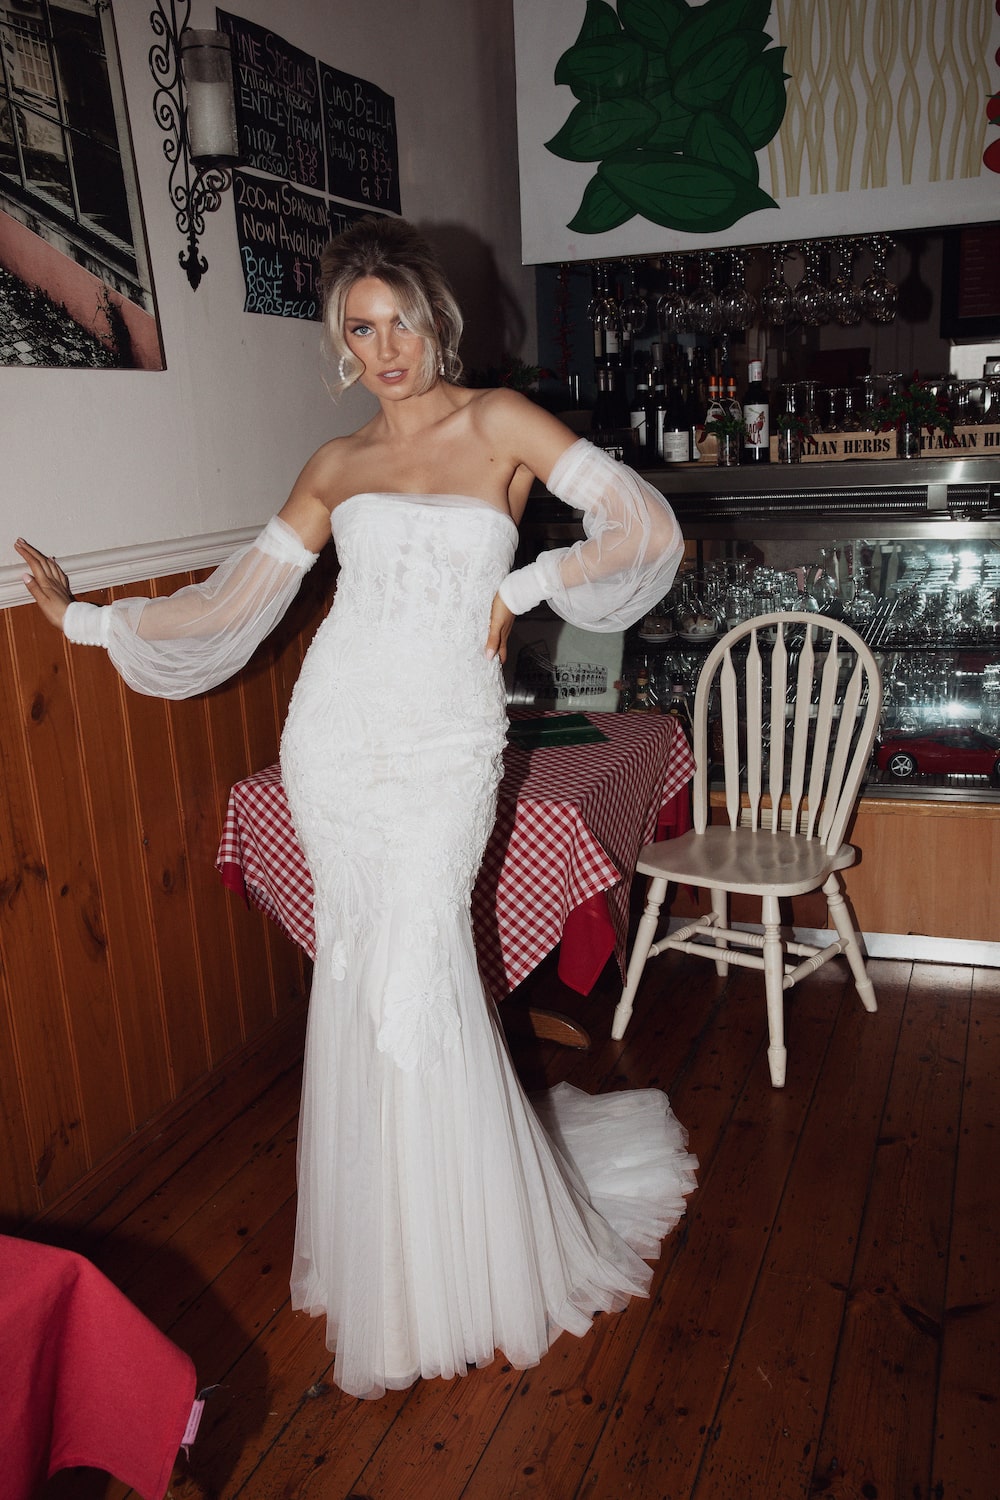 Model inside Italian cafe standing next to a small table with red and white check tablecloth leaning one hand against wall and one on waist. Wearing the Verona gown.